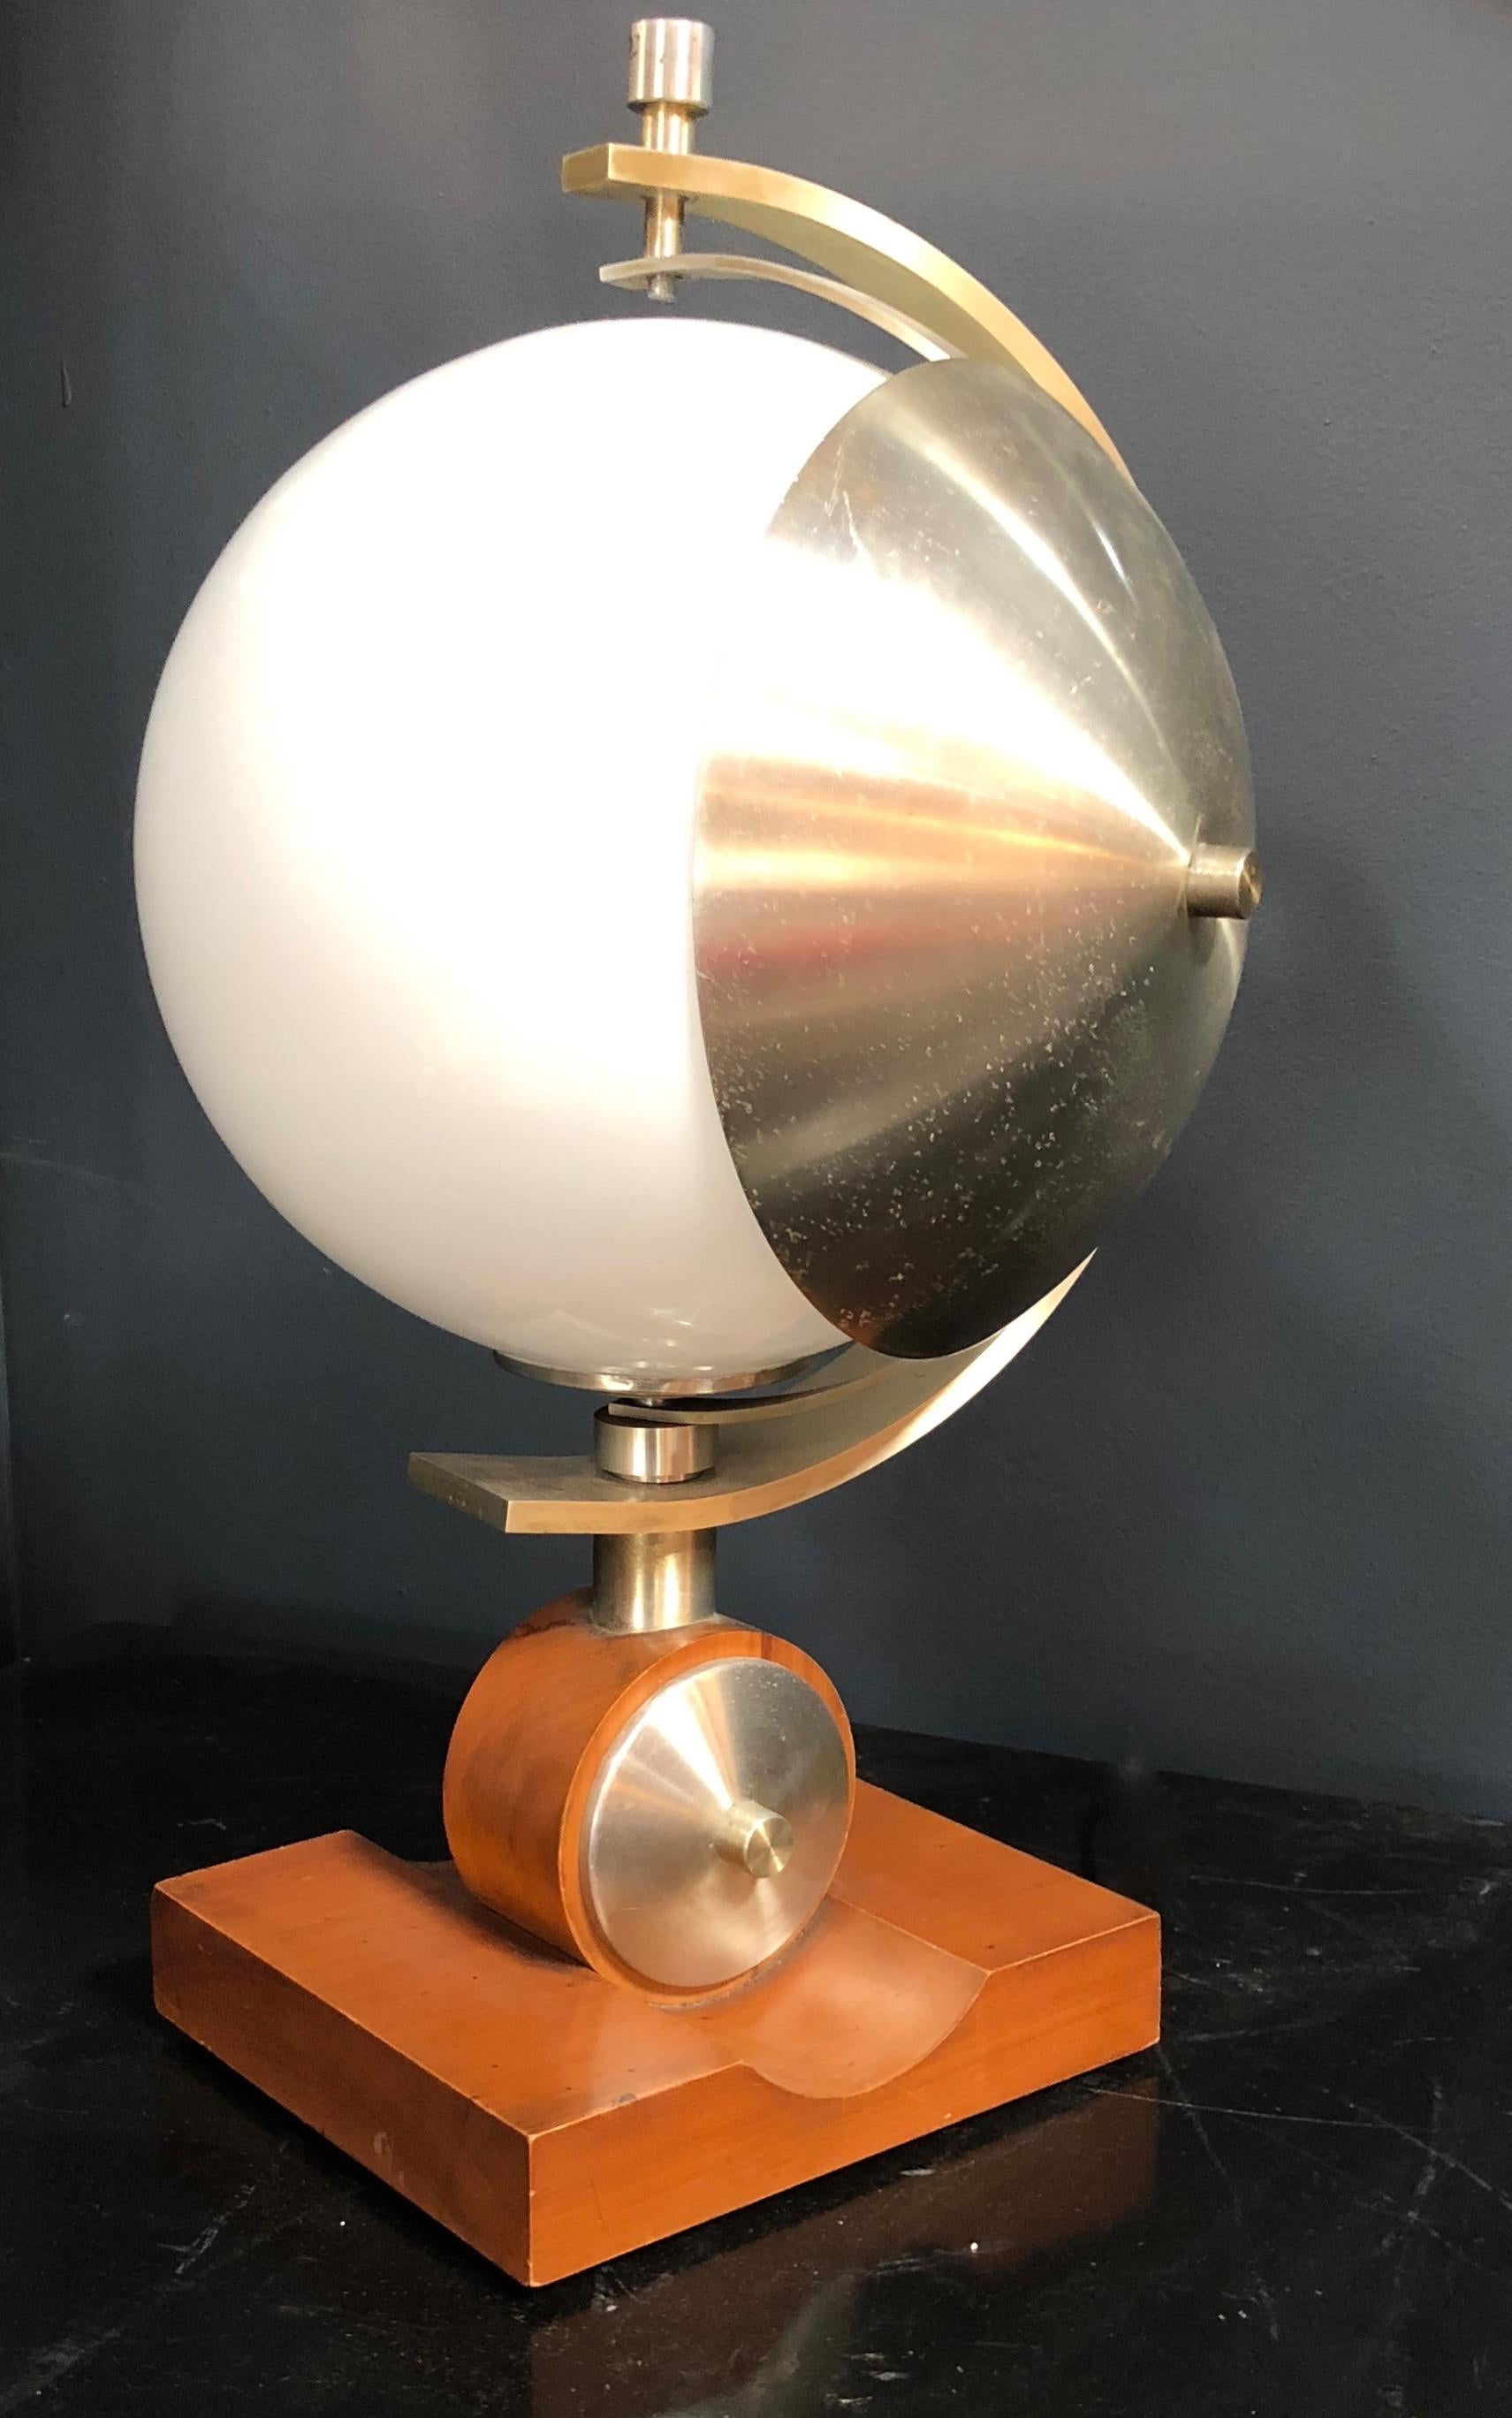 Space Age bowl table lamp with opaline white glass and metal turning part with solid wooden base.
Italian turn able table lamp, metal parts, lacquered wood base and opaline glass, good conditions overall, base sizes H 2